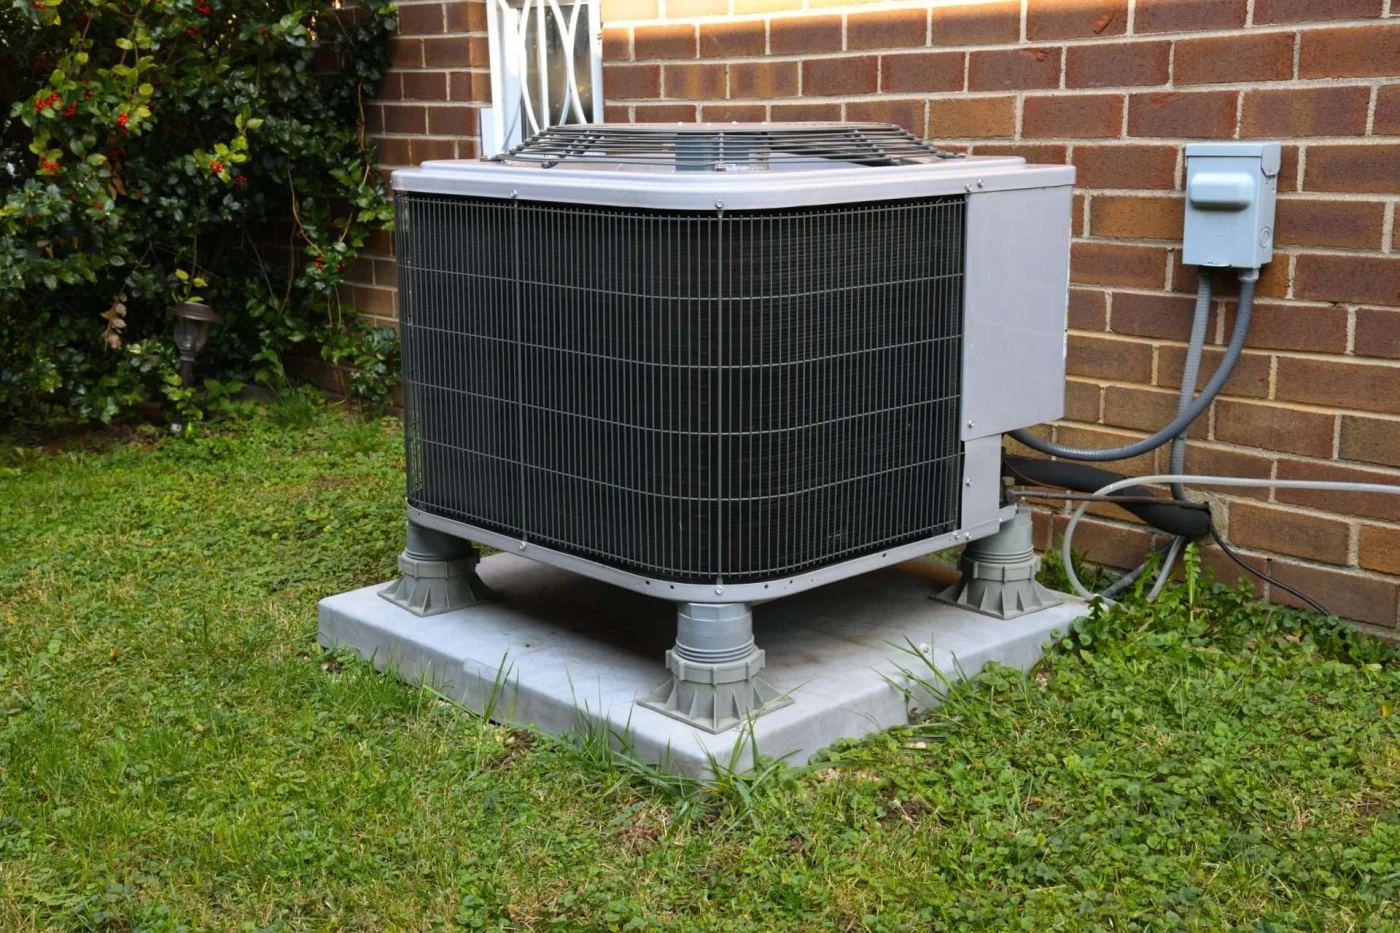 An Exterior HVAC Unit at Your Home